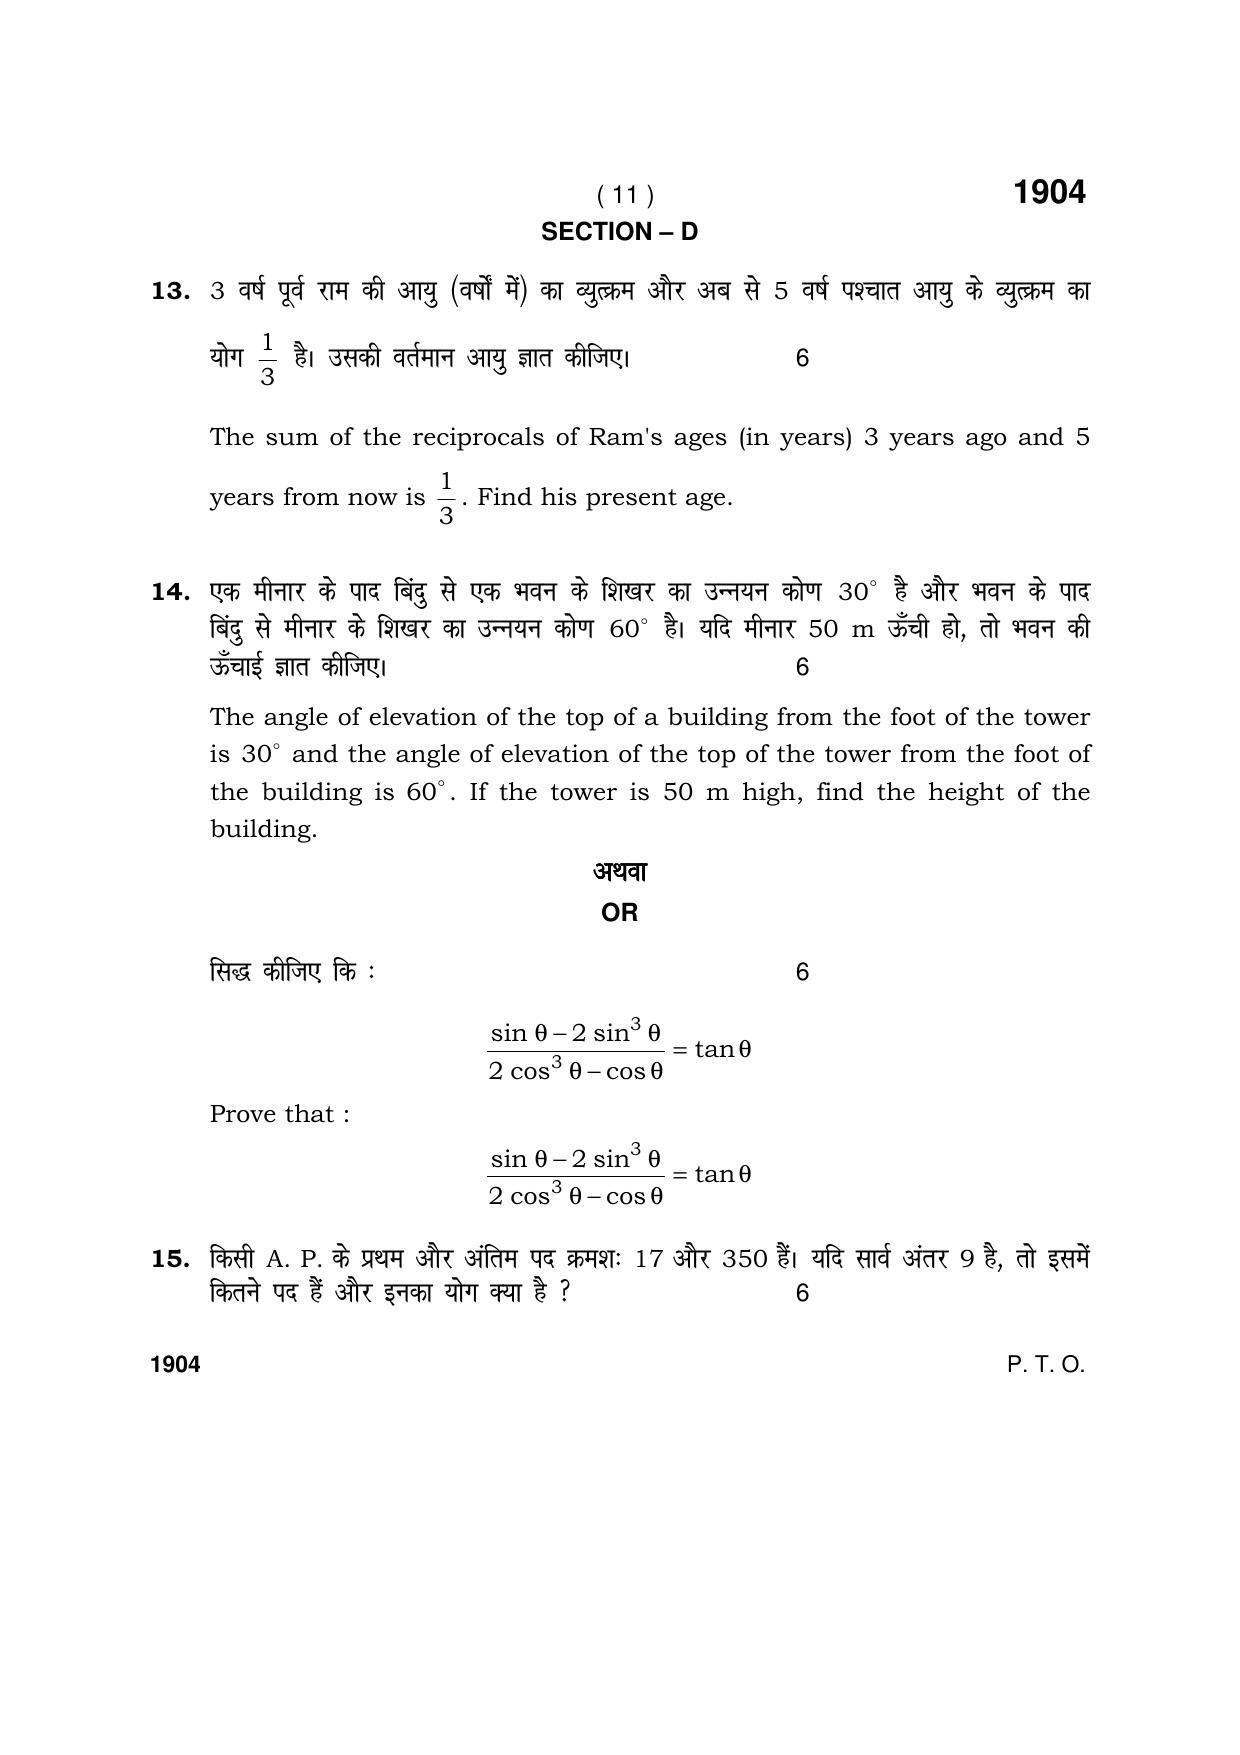 Haryana Board HBSE Class 10 Math Blind Candidate 2017 Question Paper - Page 11